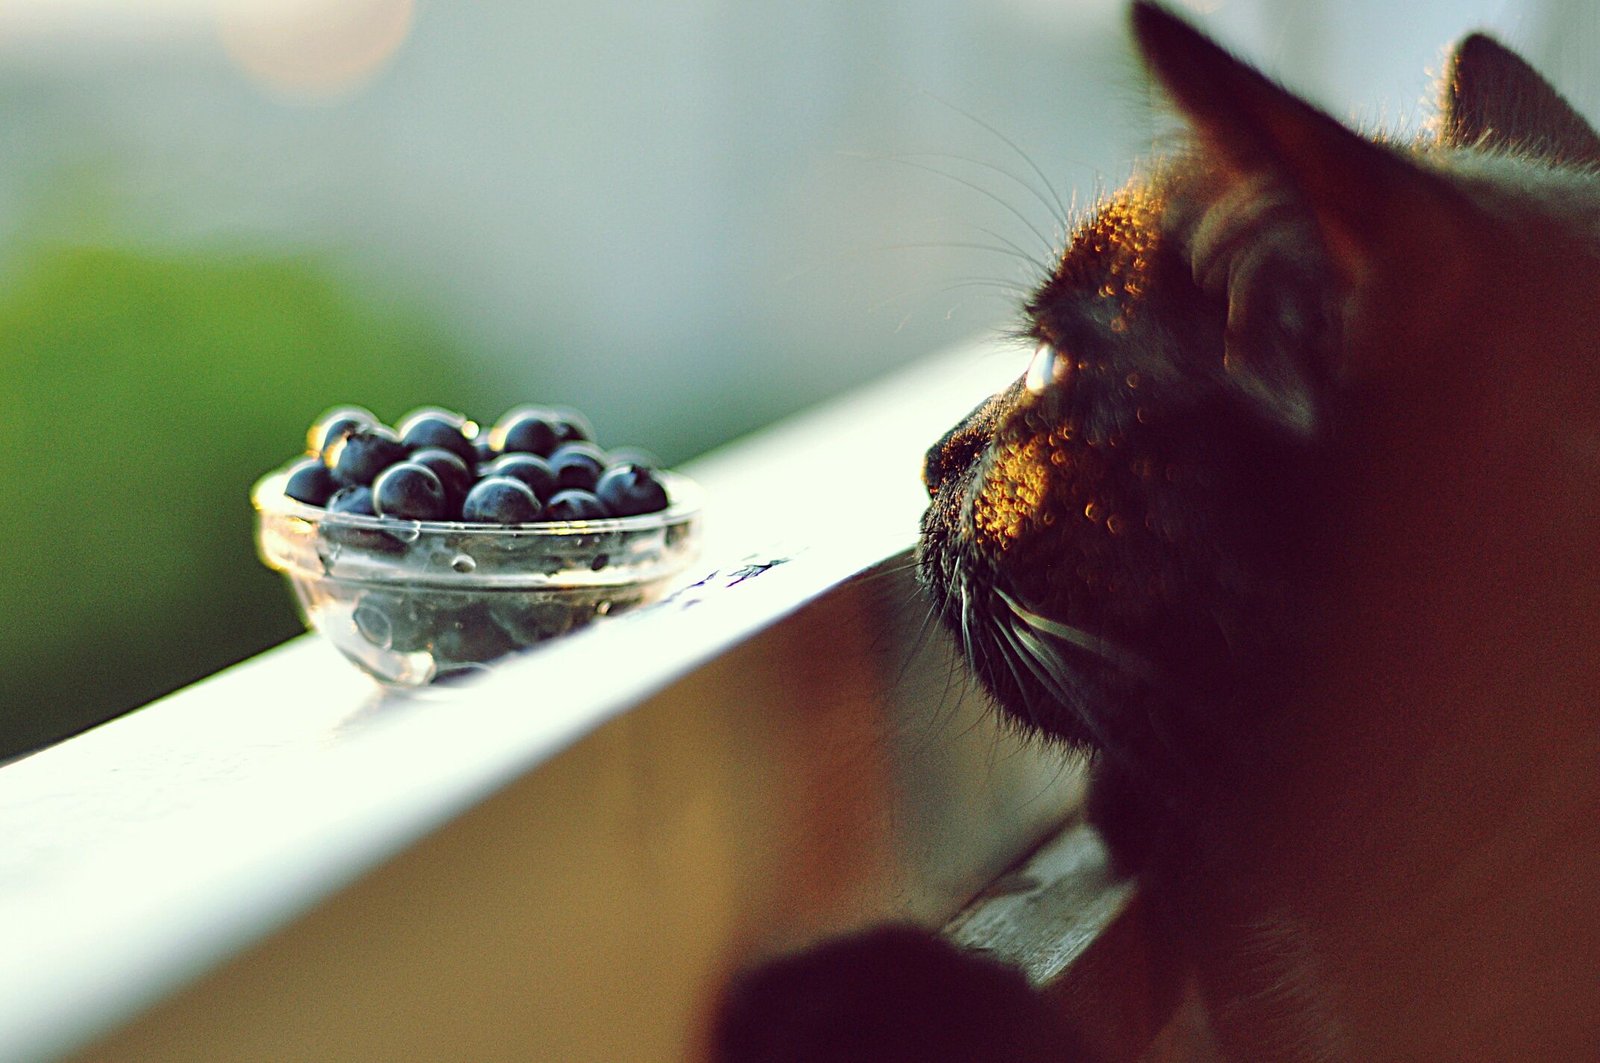 Fruits That Can Be Included in a Cat's Diet